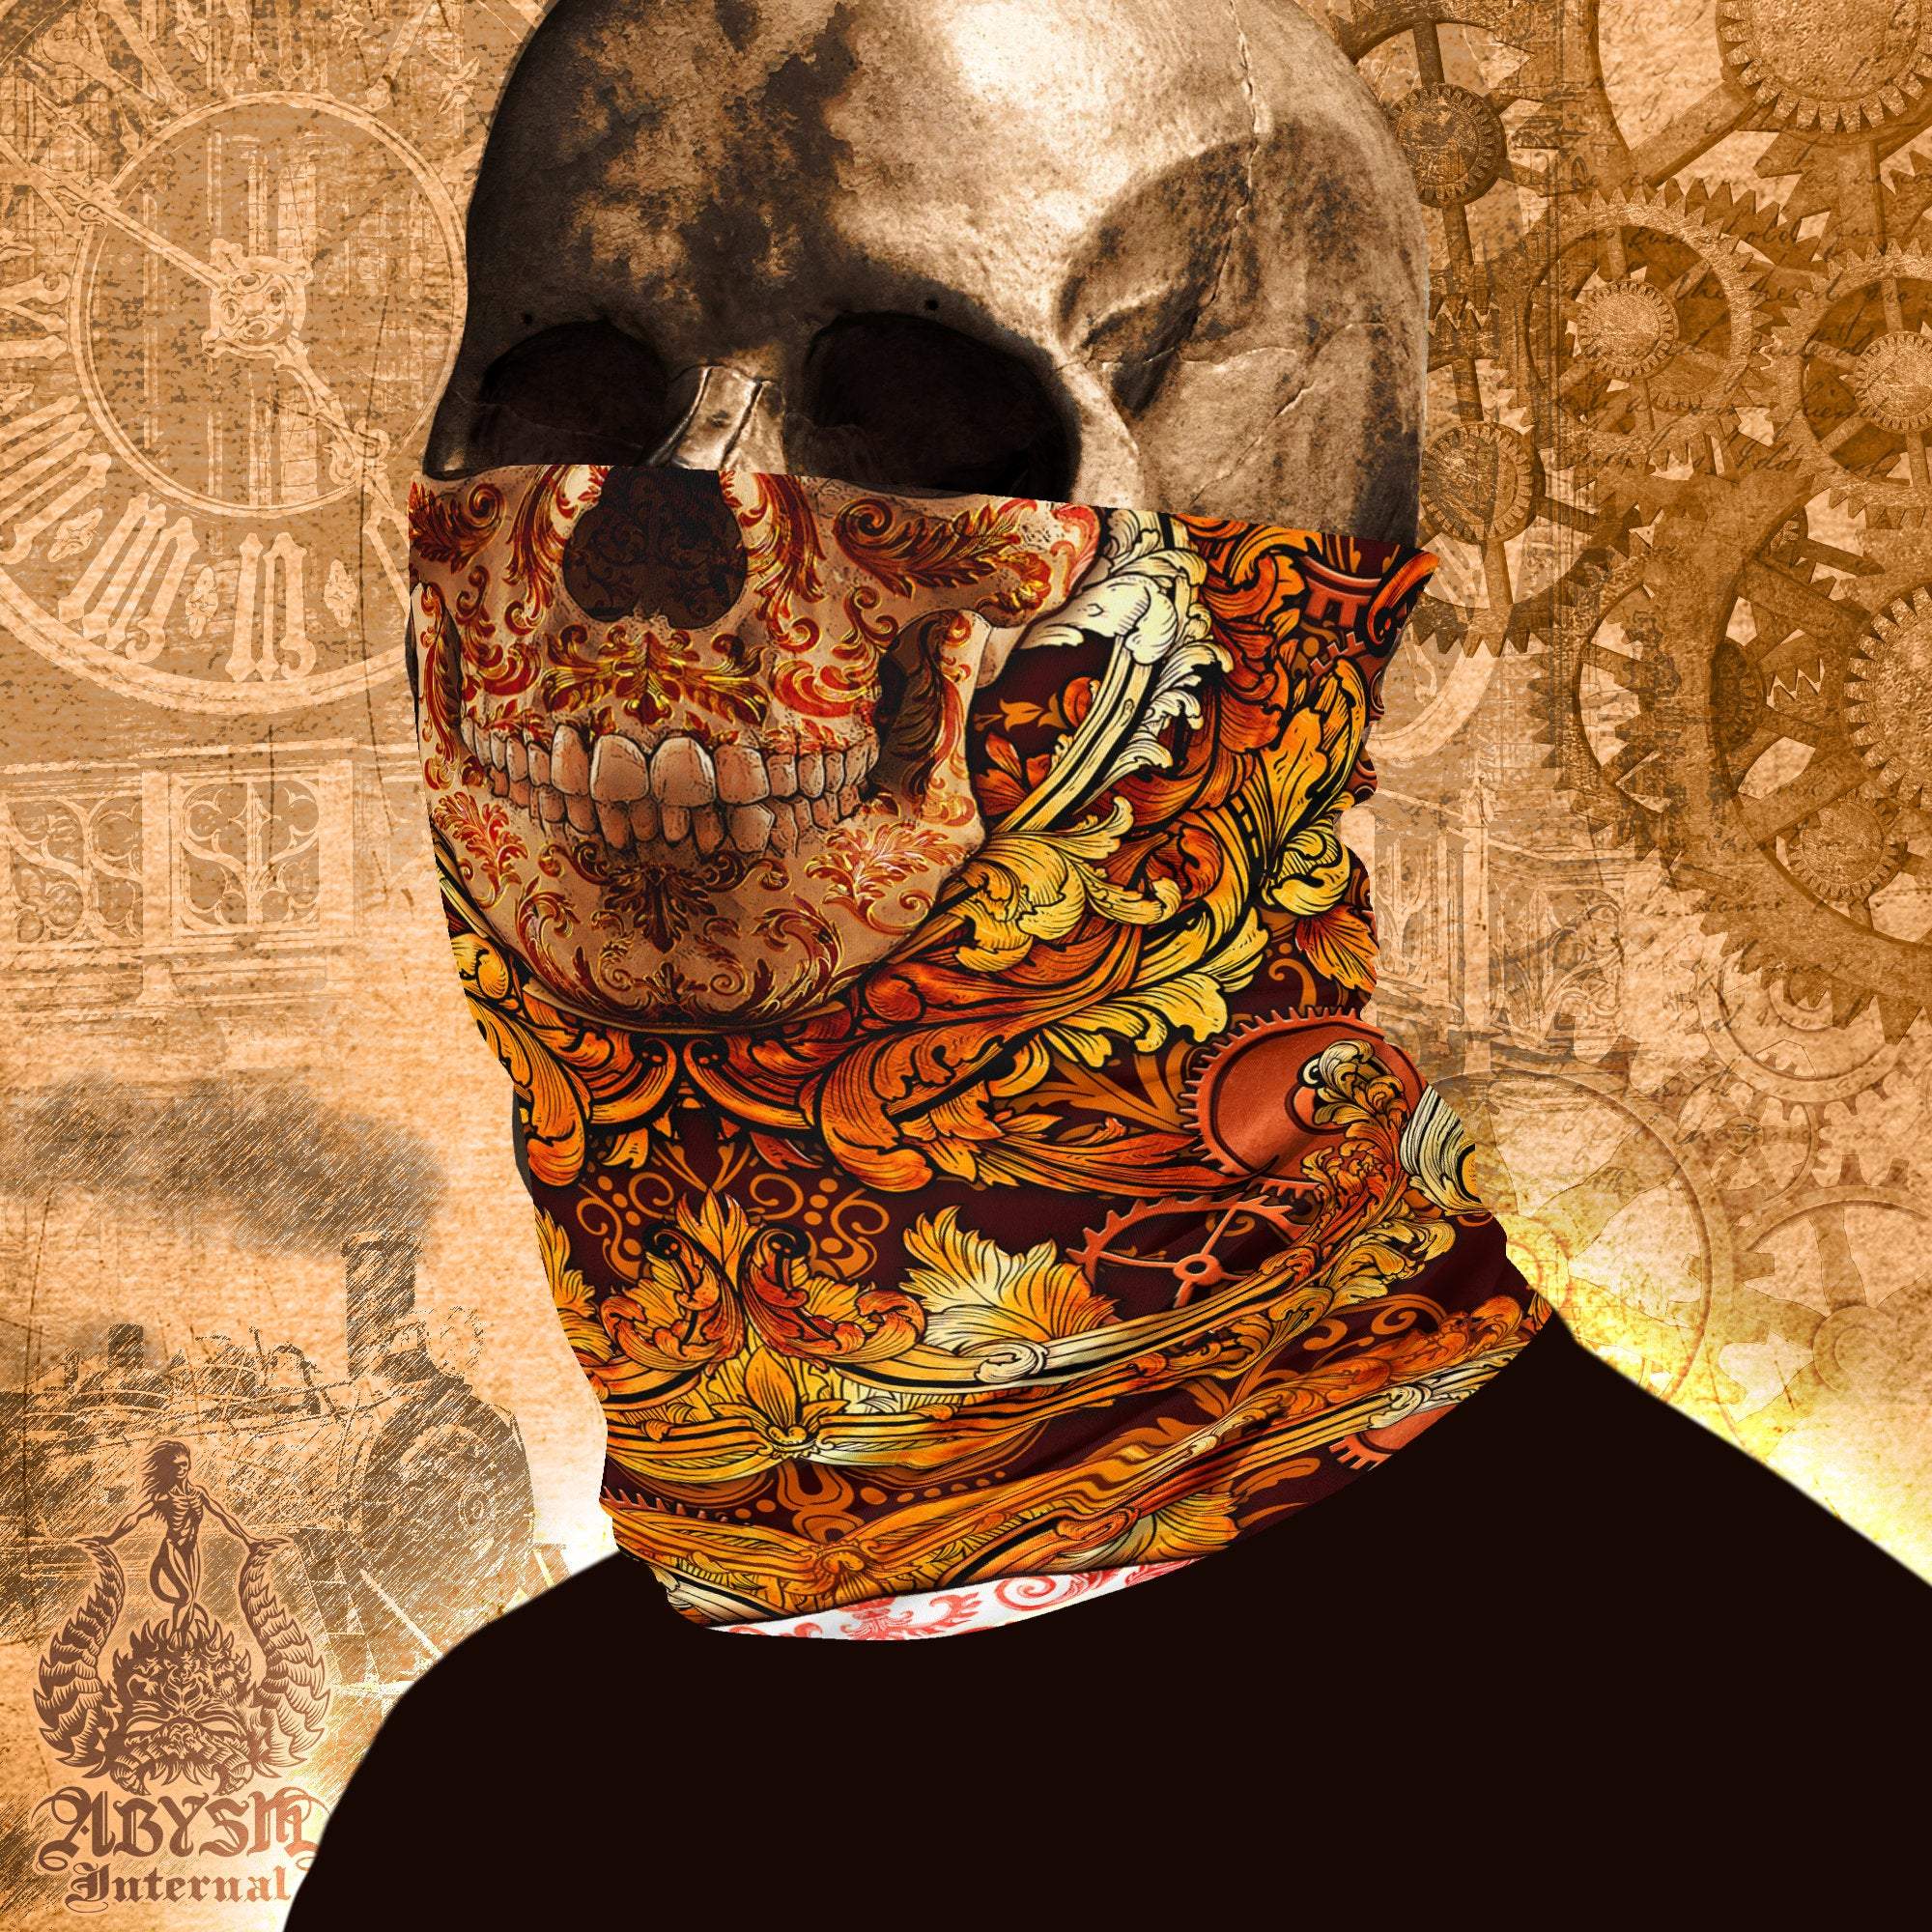 Skull Neck Gaiter, Face Mask, Head Covering, Victorian Goth Street Outfit - Steampunk - Abysm Internal